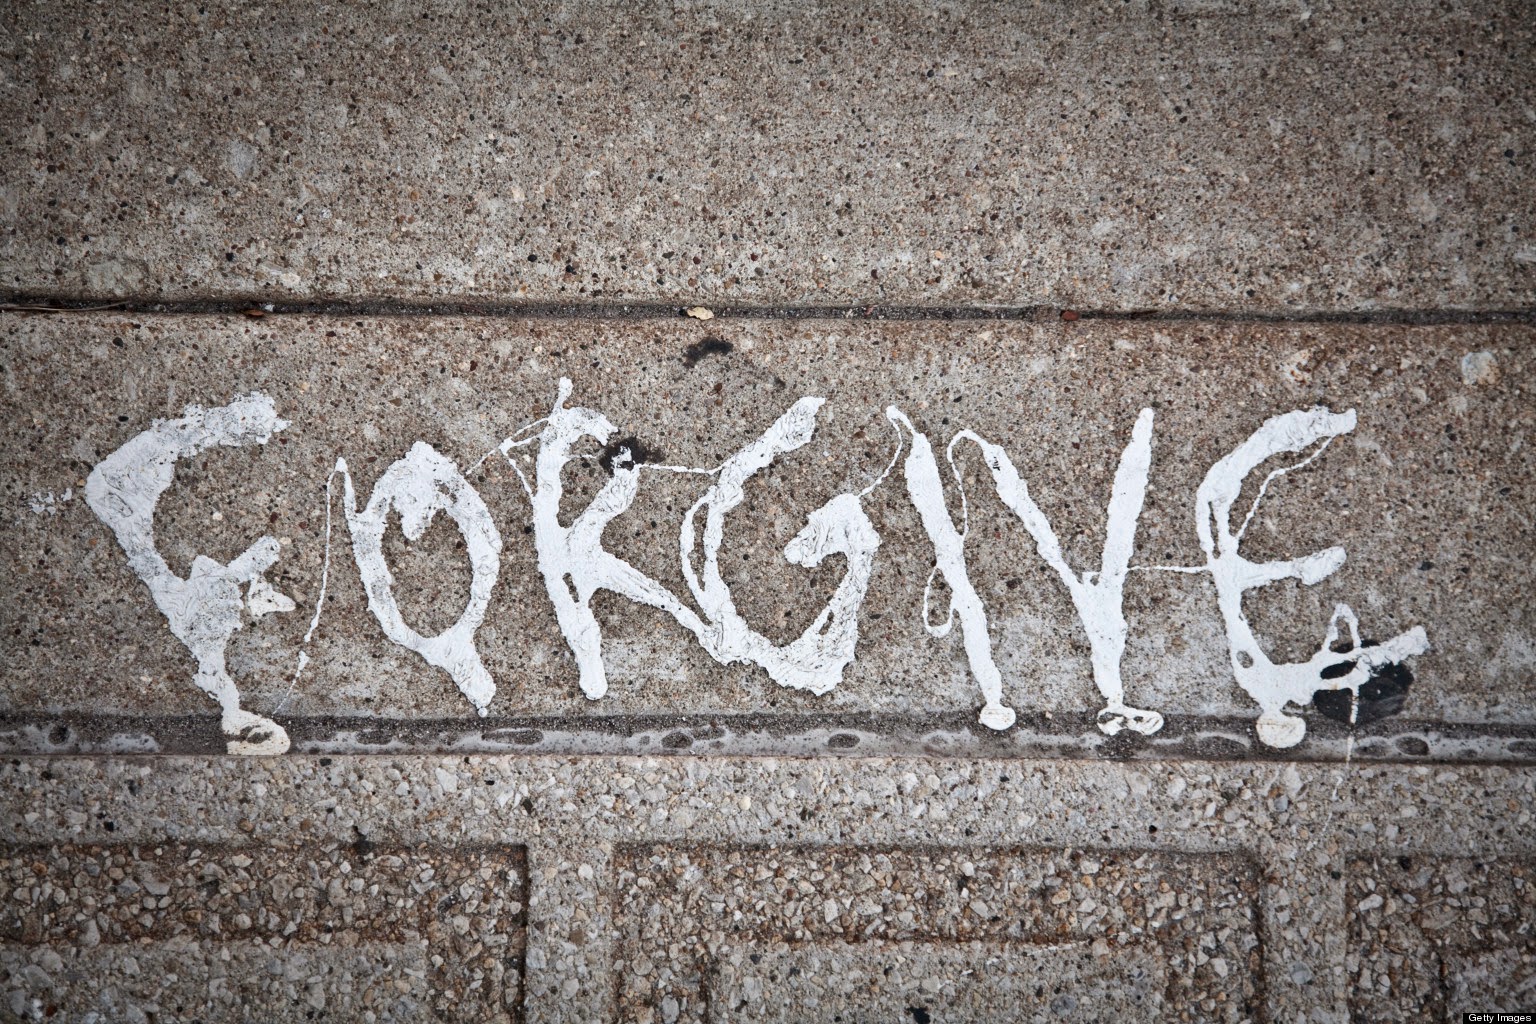 mynewblog: The major work in forgiveness is done in your own heart.